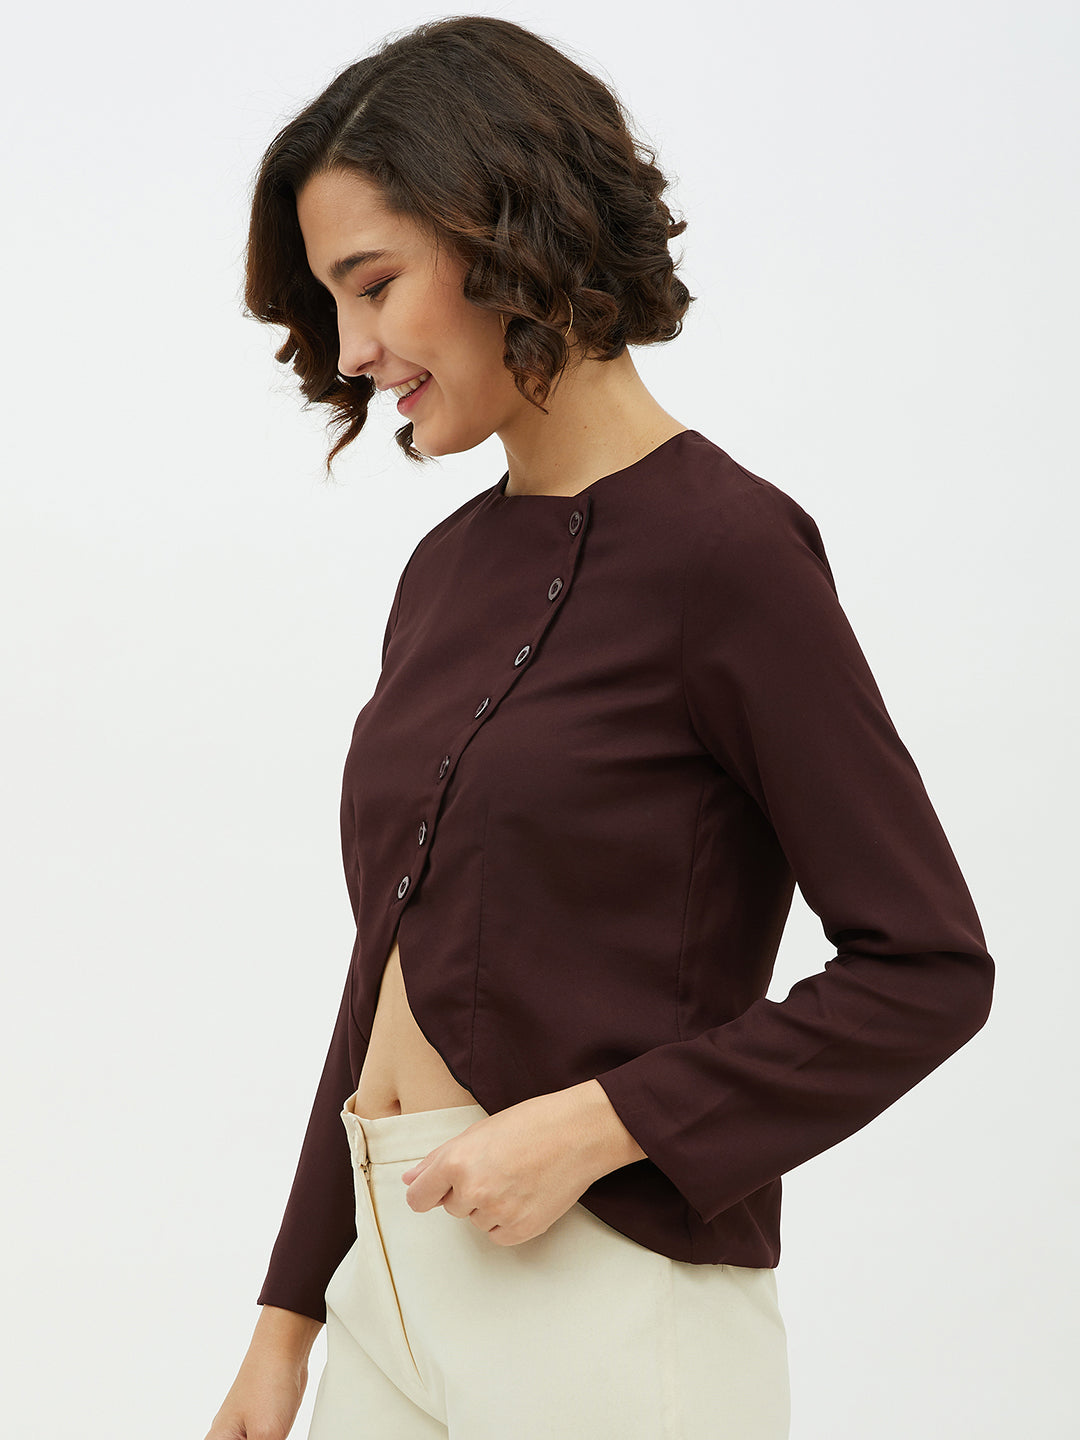 Women's Maroon top with diagonal button top - StyleStone